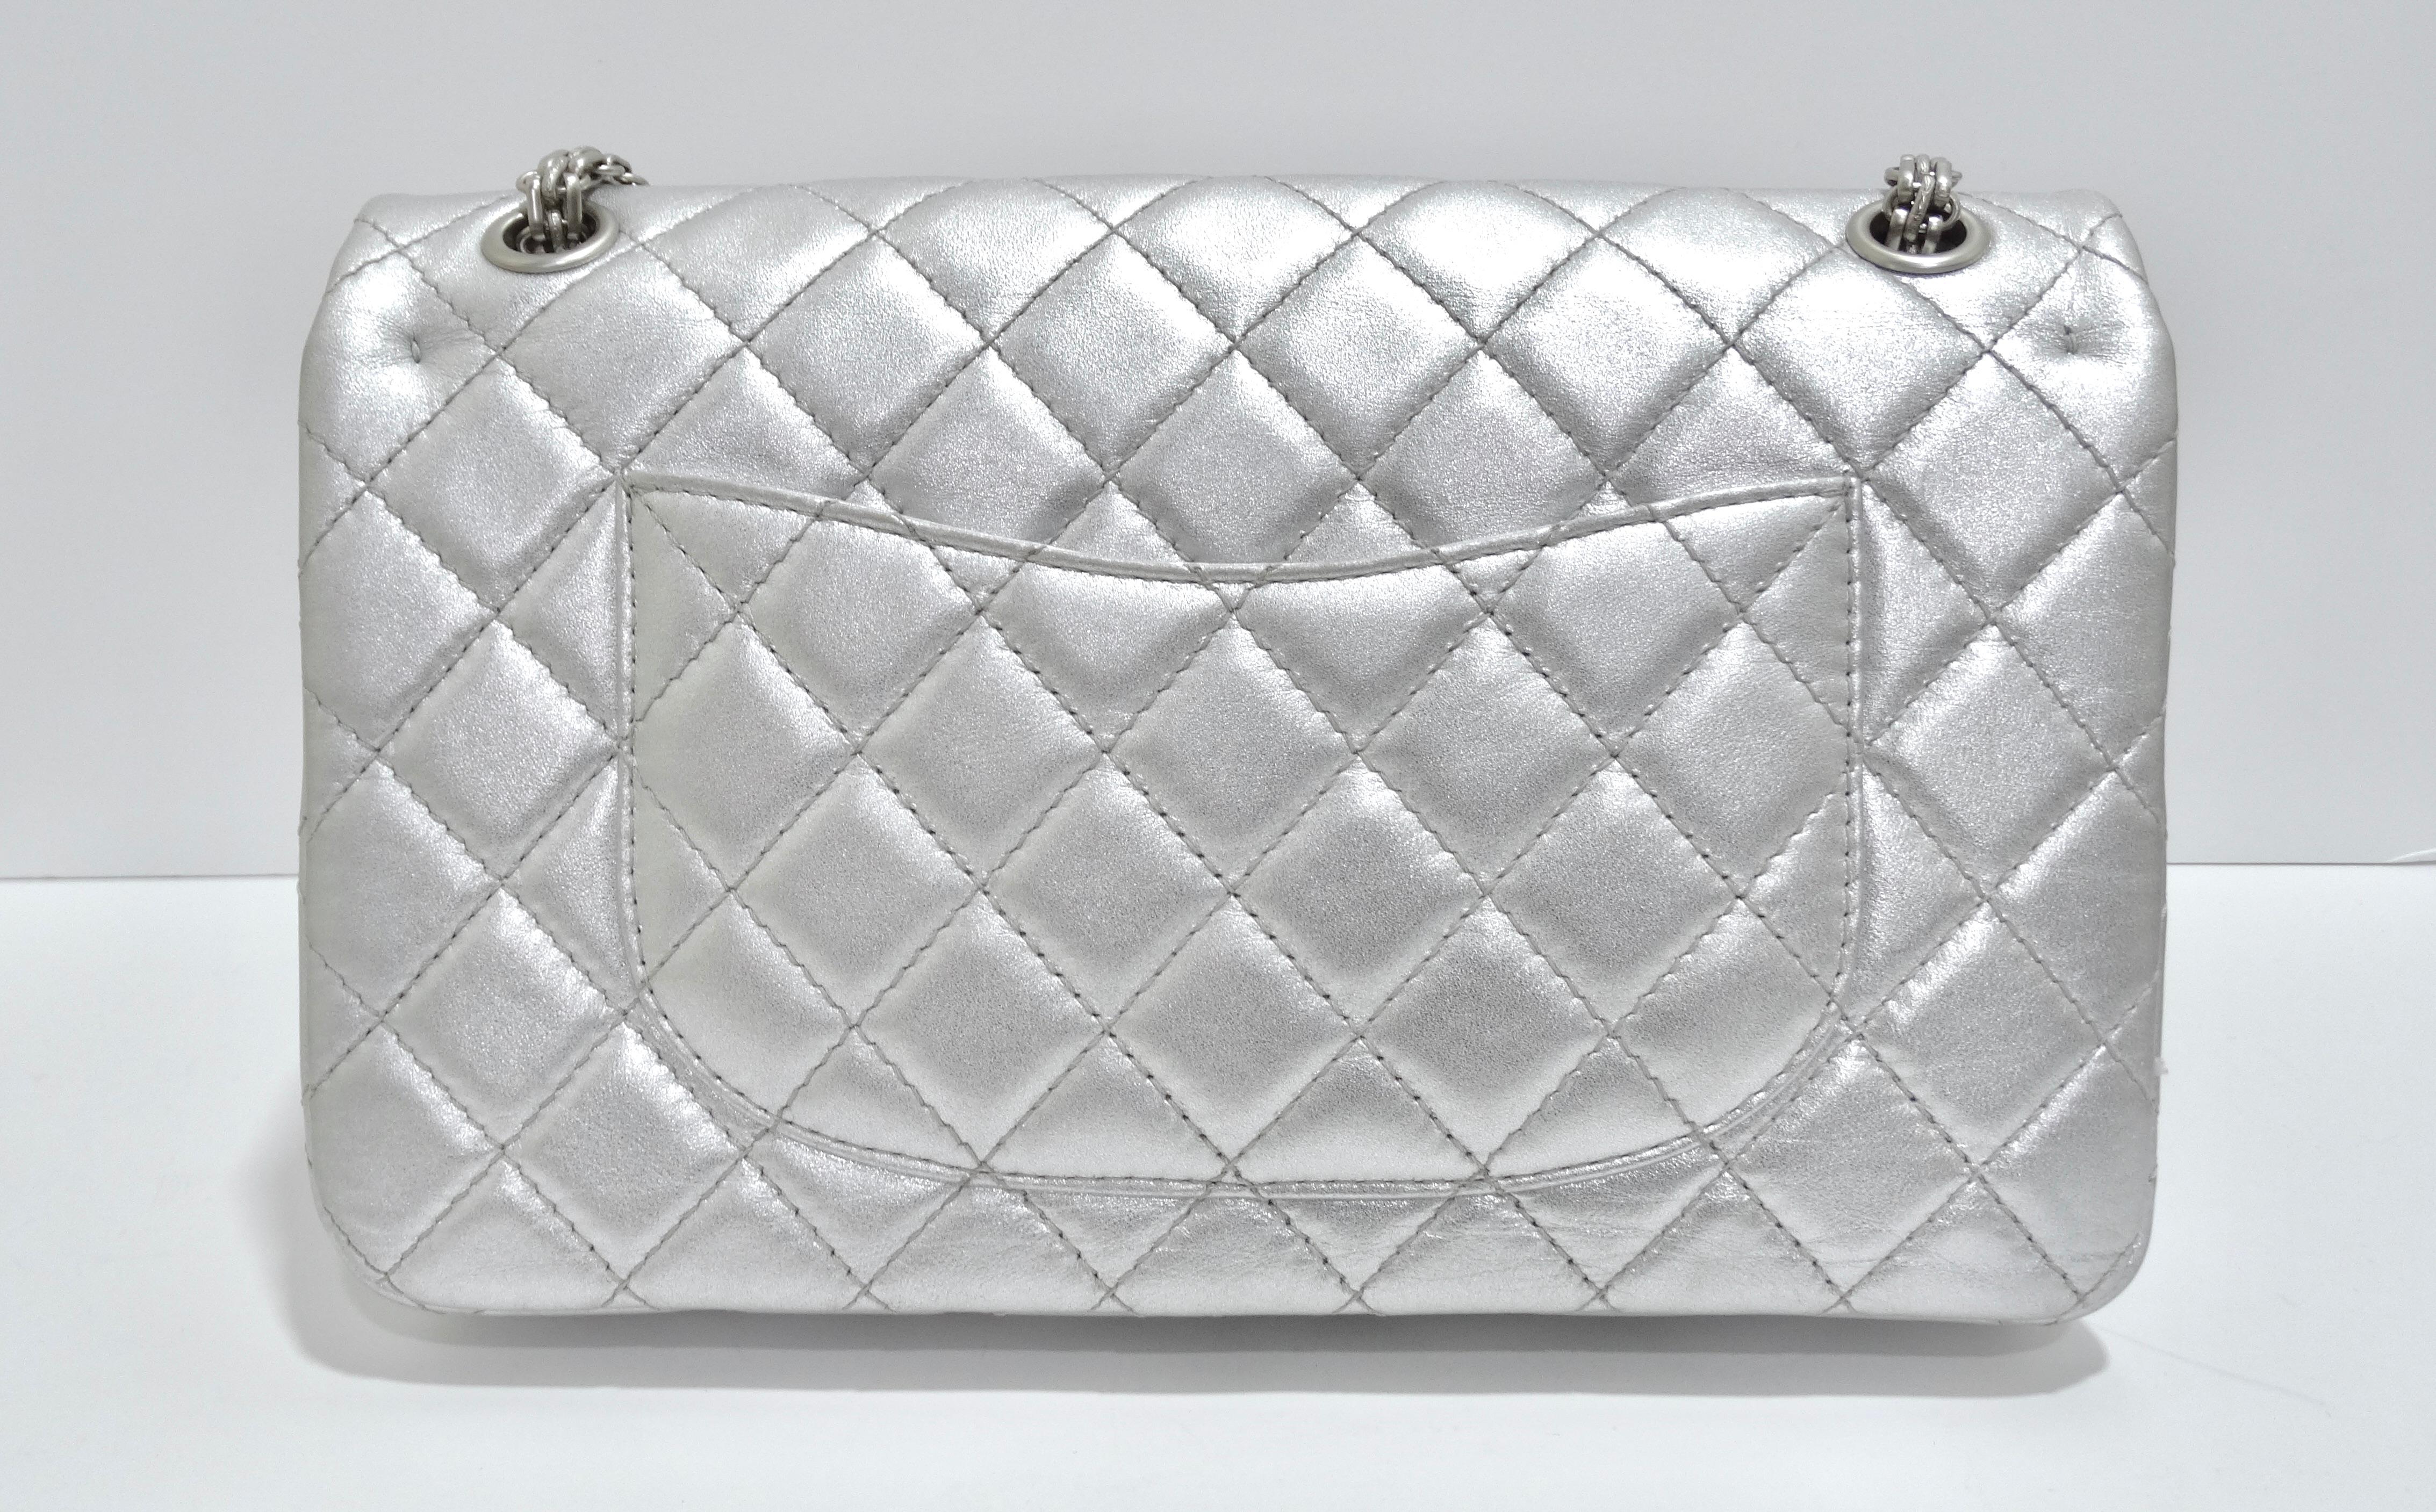 Chanel Metallic Calfskin Quilted 2.55 Reissue Jumbo Double Flap For Sale 3